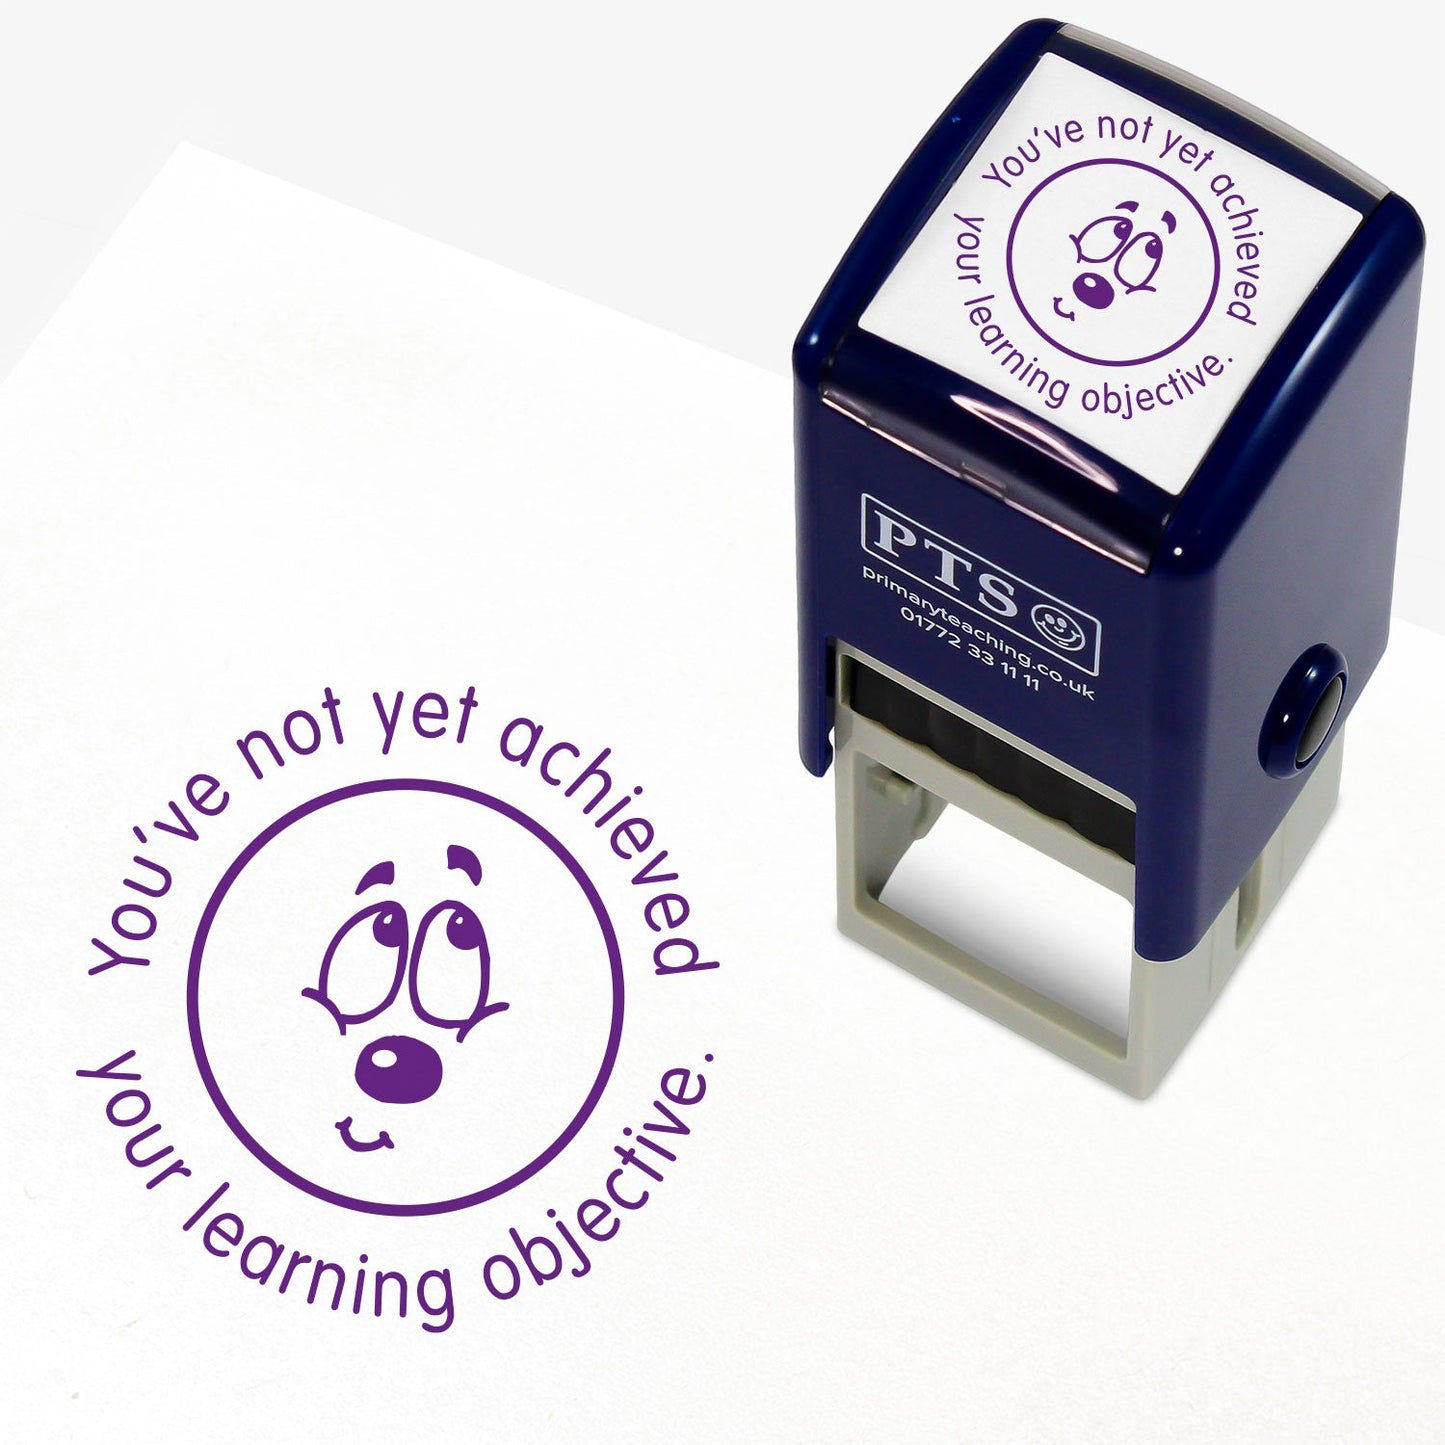 You've Not Yet Achieved Your Learning Objective Stamper - 25mm